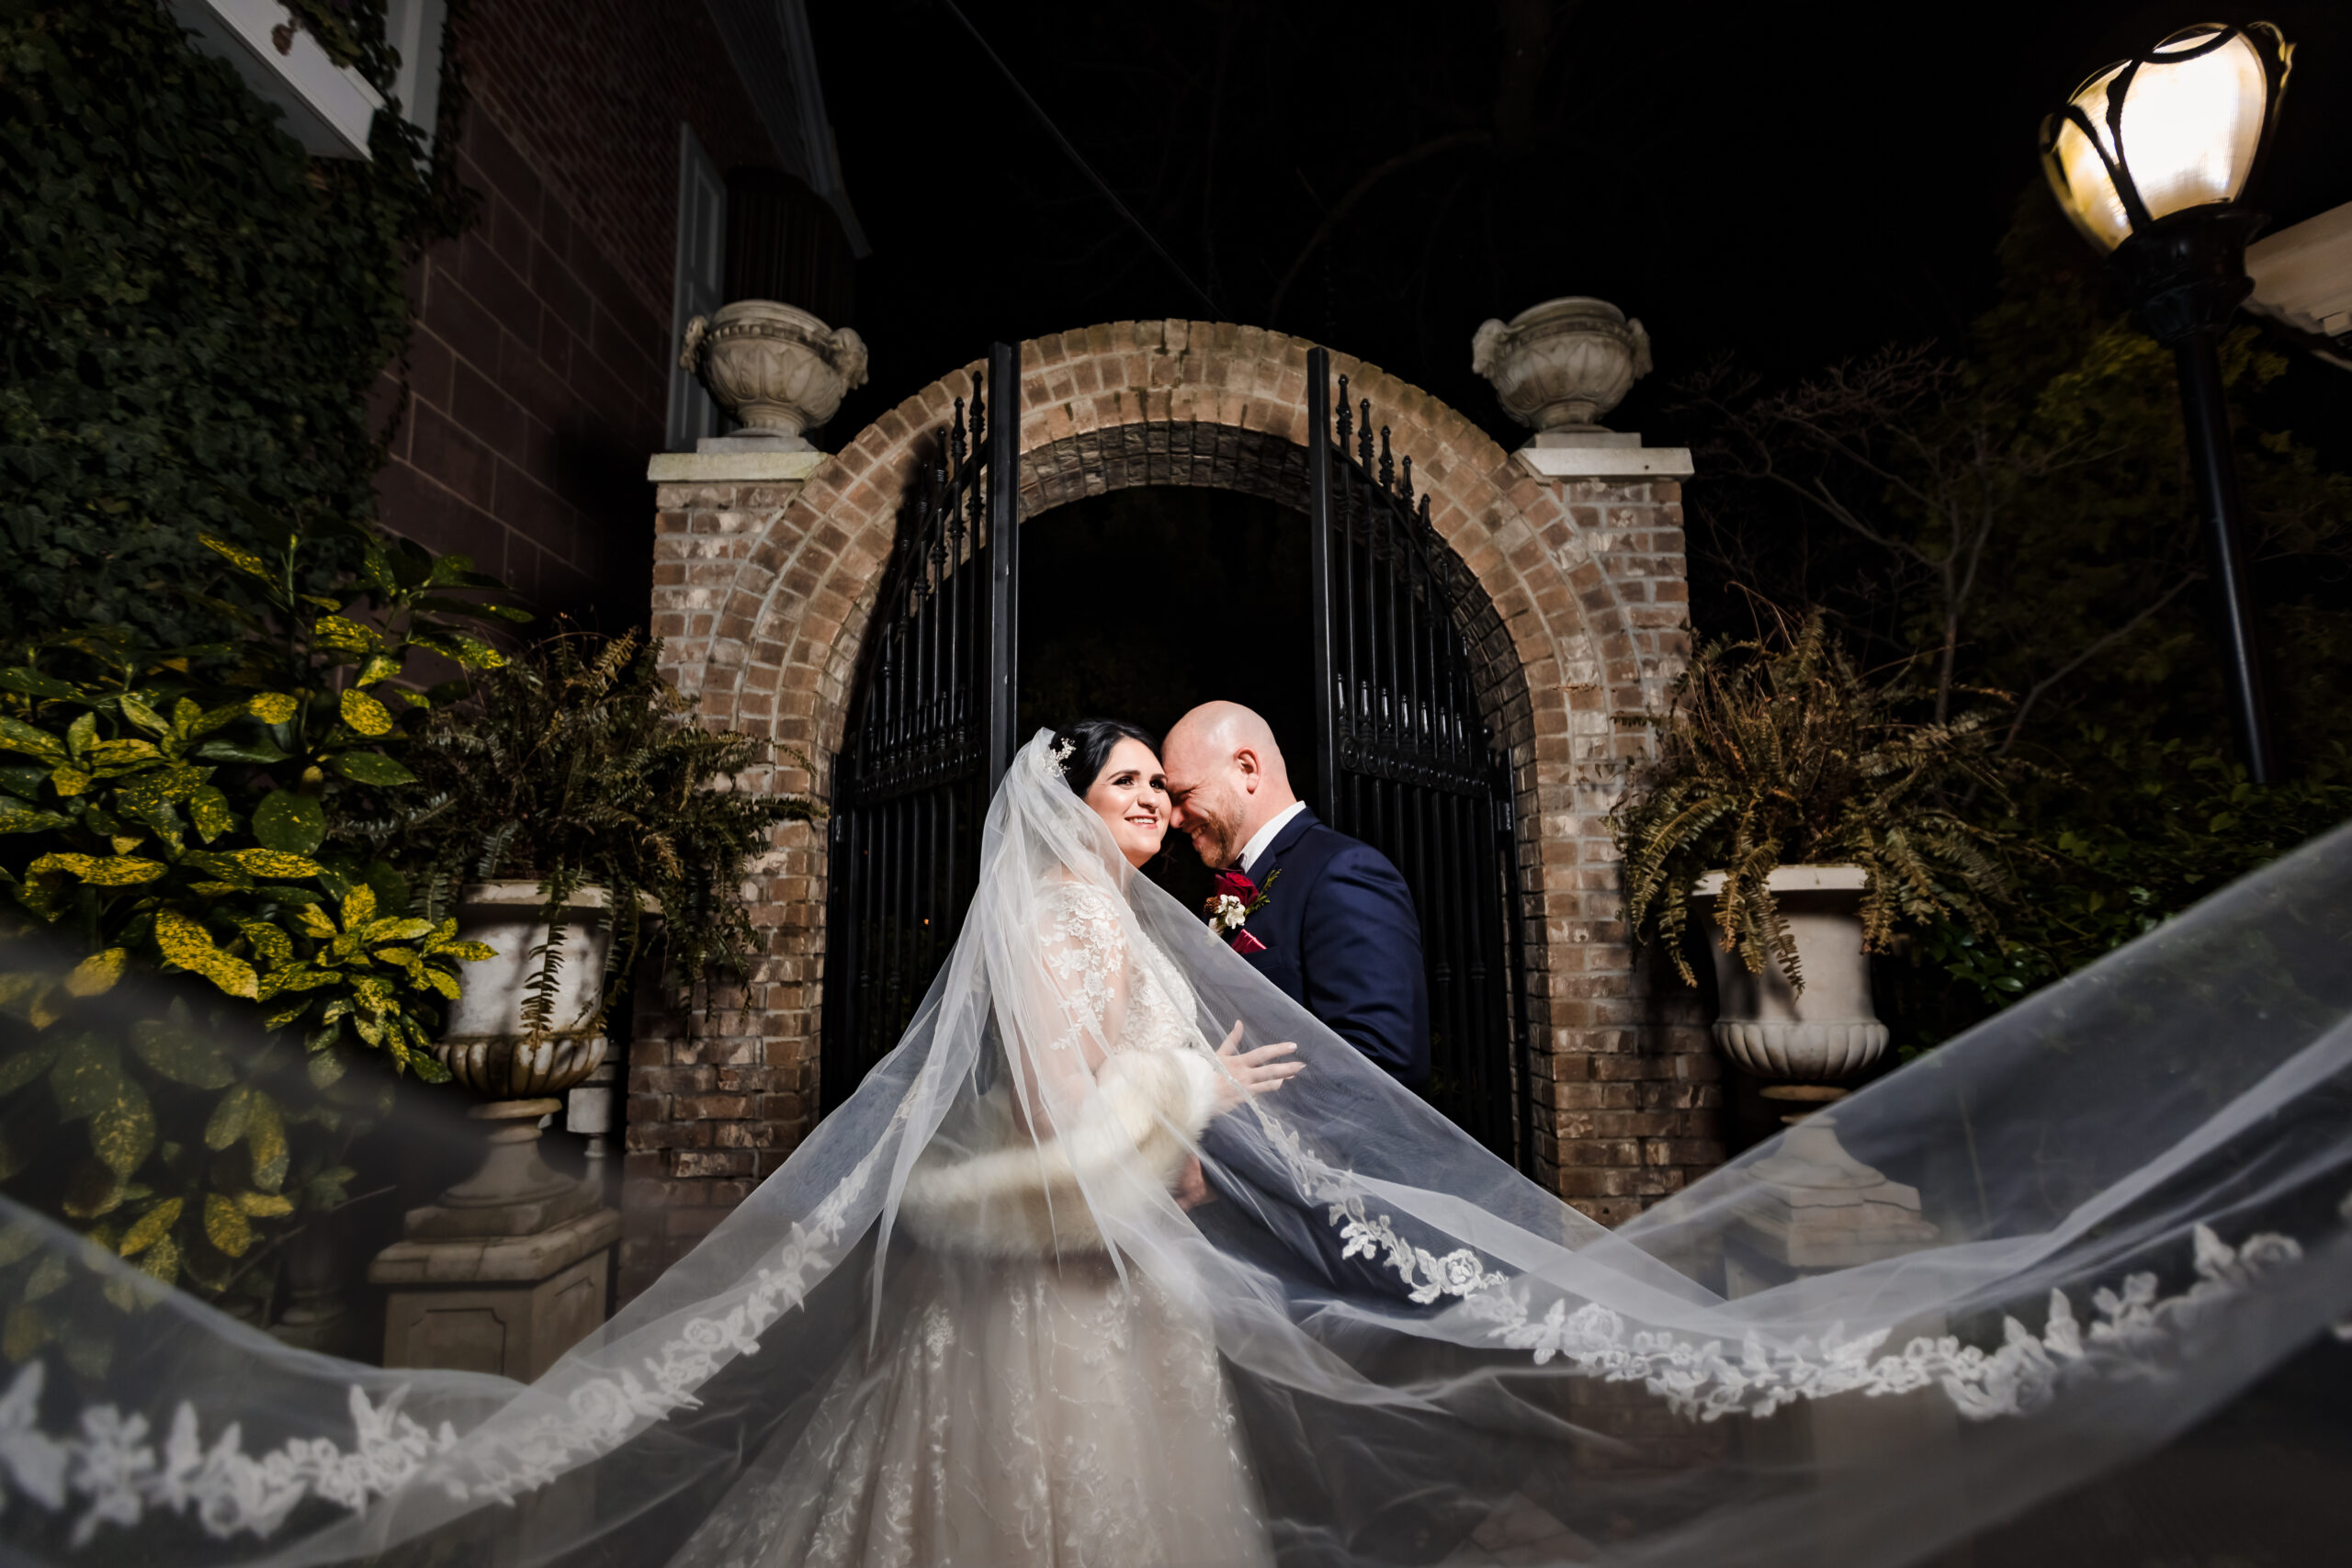 A bride and groom posing in front of a gate at night, captured by New Jersey Wedding Photographer Jarot Bocanegra.